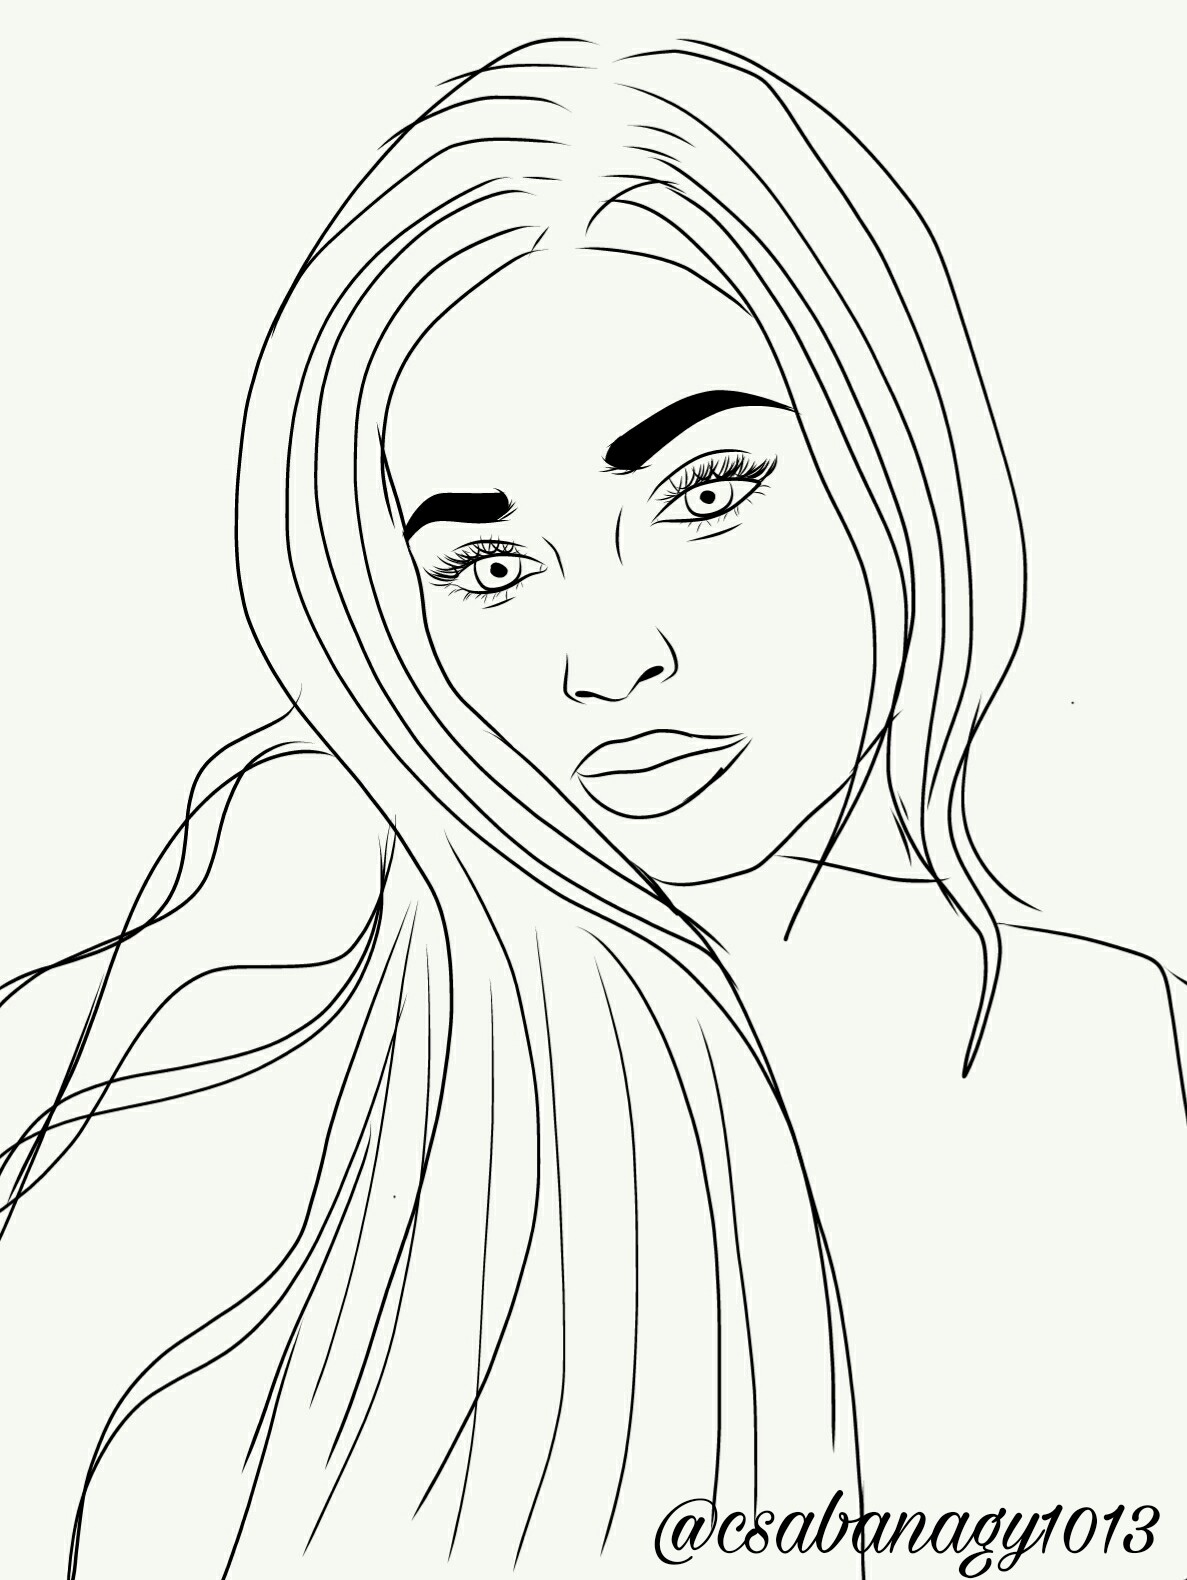 Download Cardi B Coloring Pages / "Evolution of Beyonce" Coloring Book Is the Perfect Way to ... : Get up ...